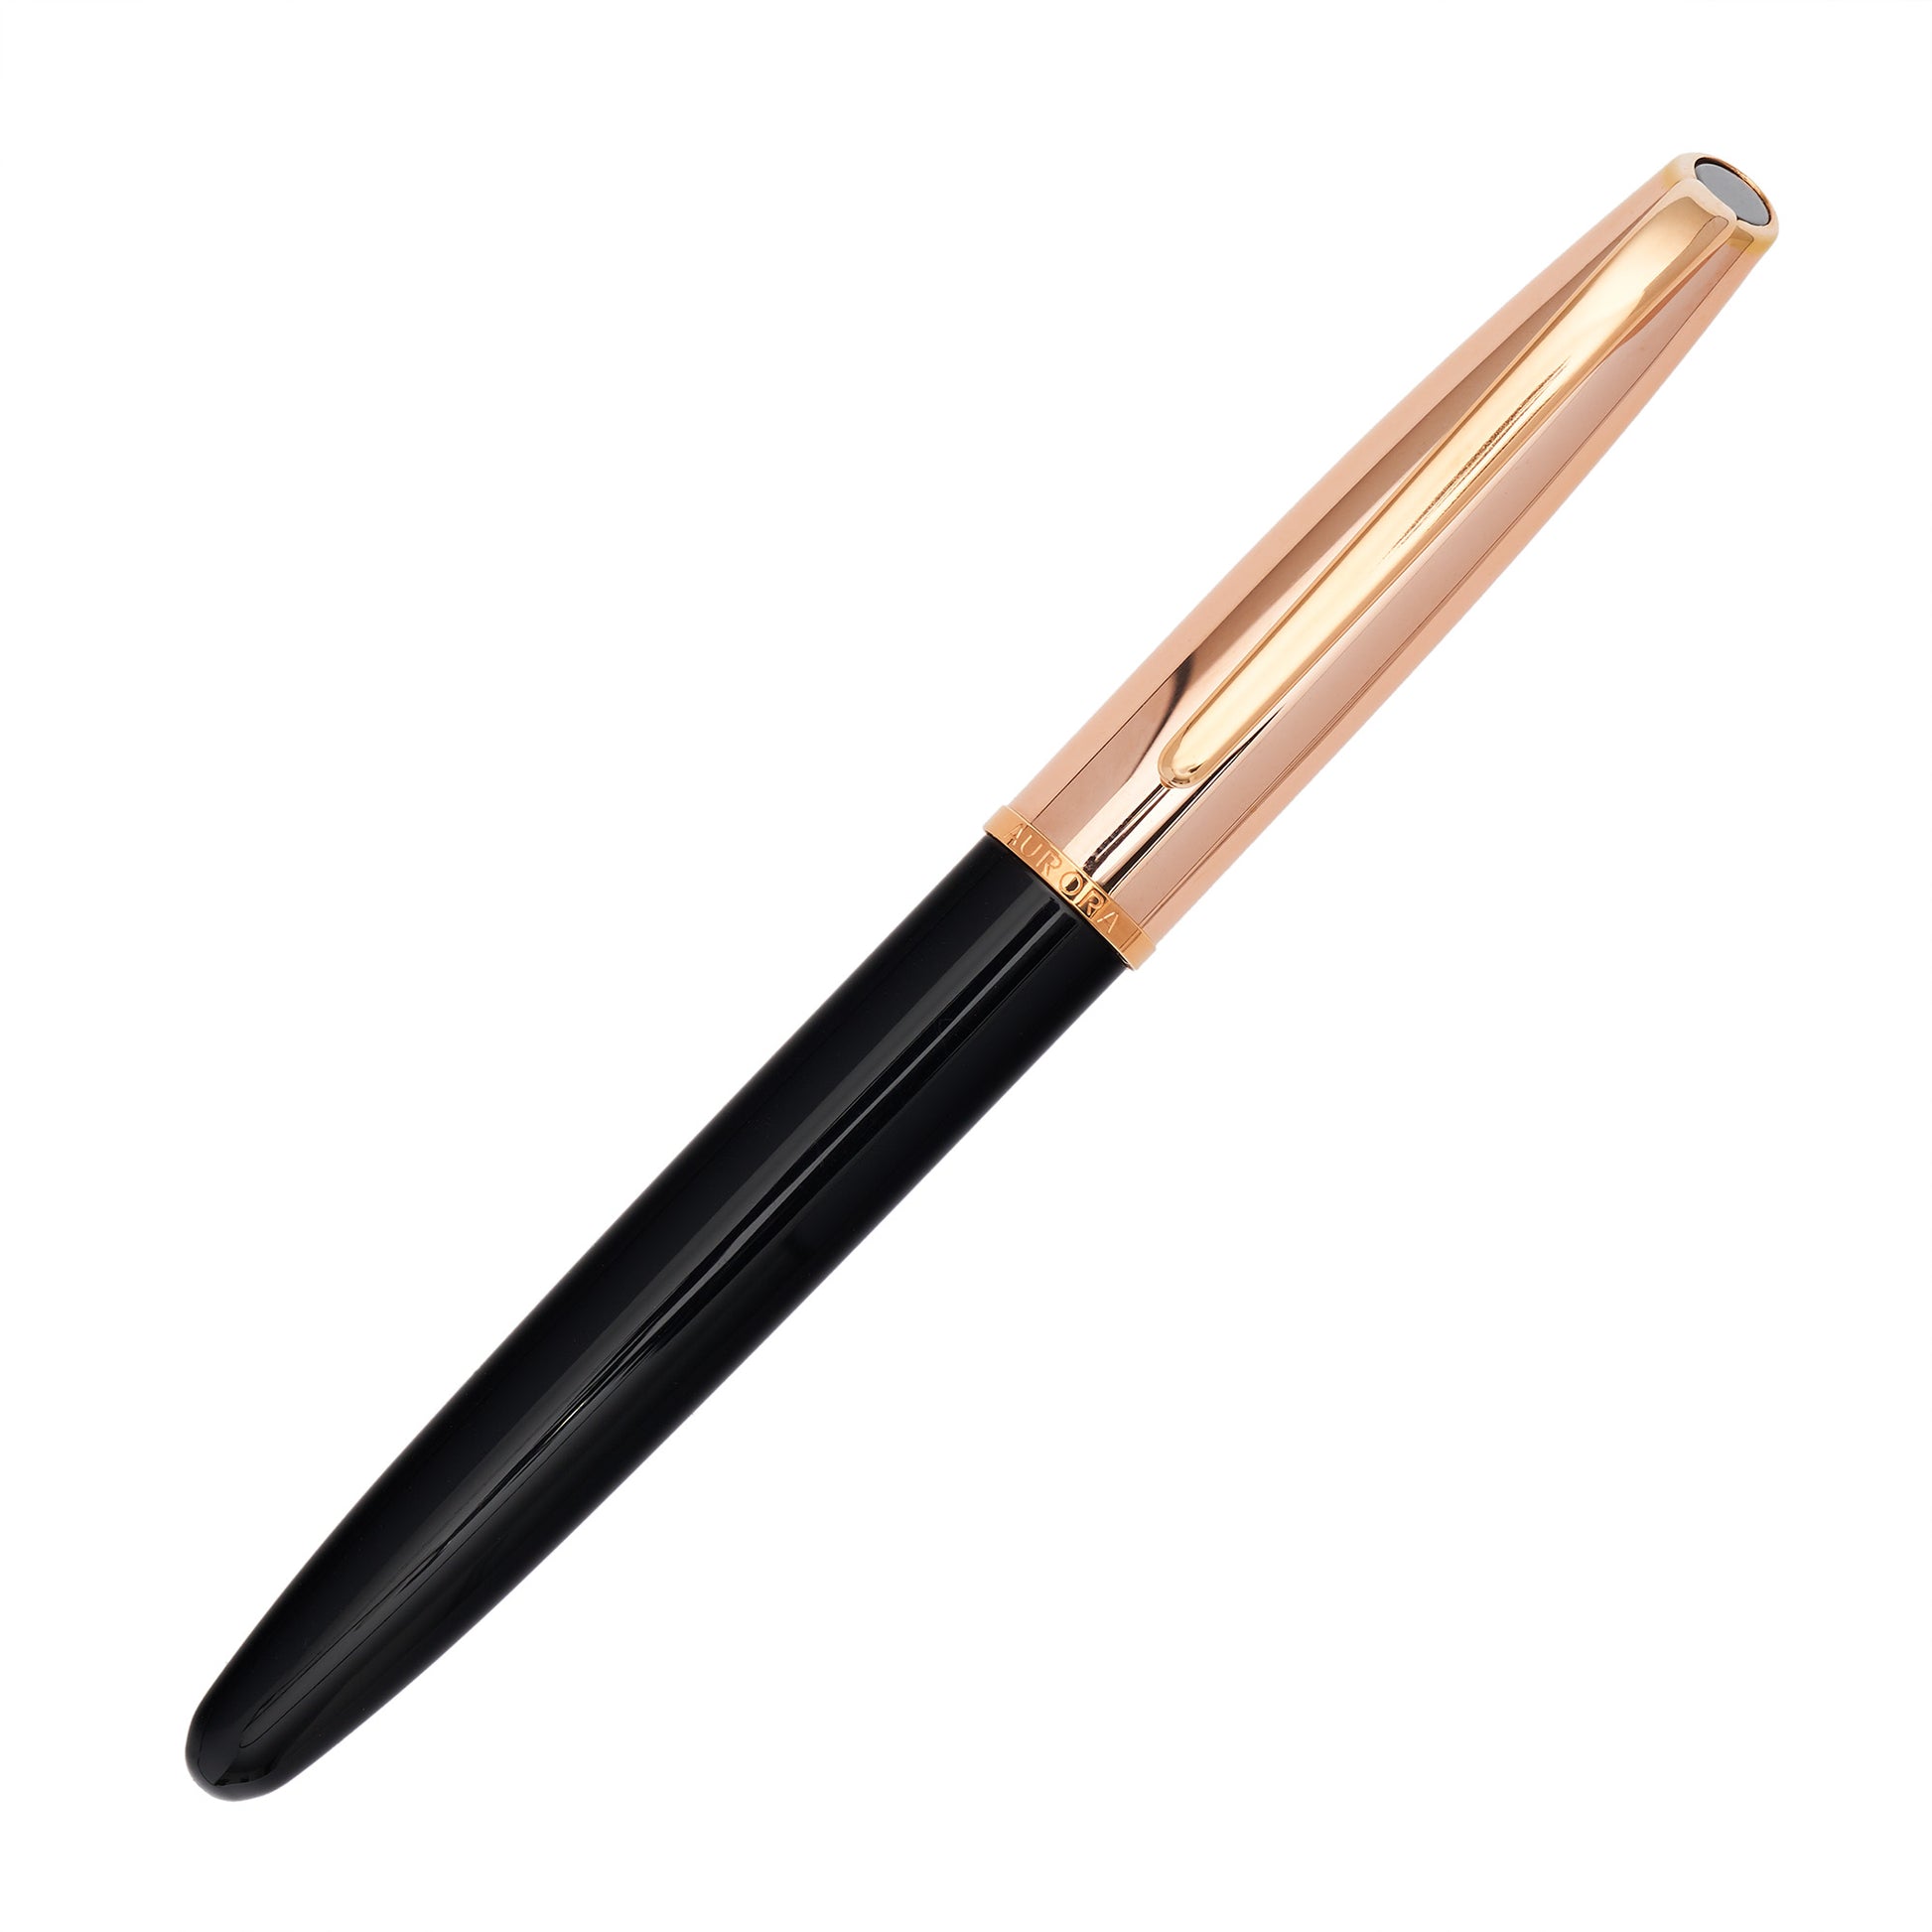 Aurora Style Fountain Pen Made in Italy Rose Gold Cap Capped